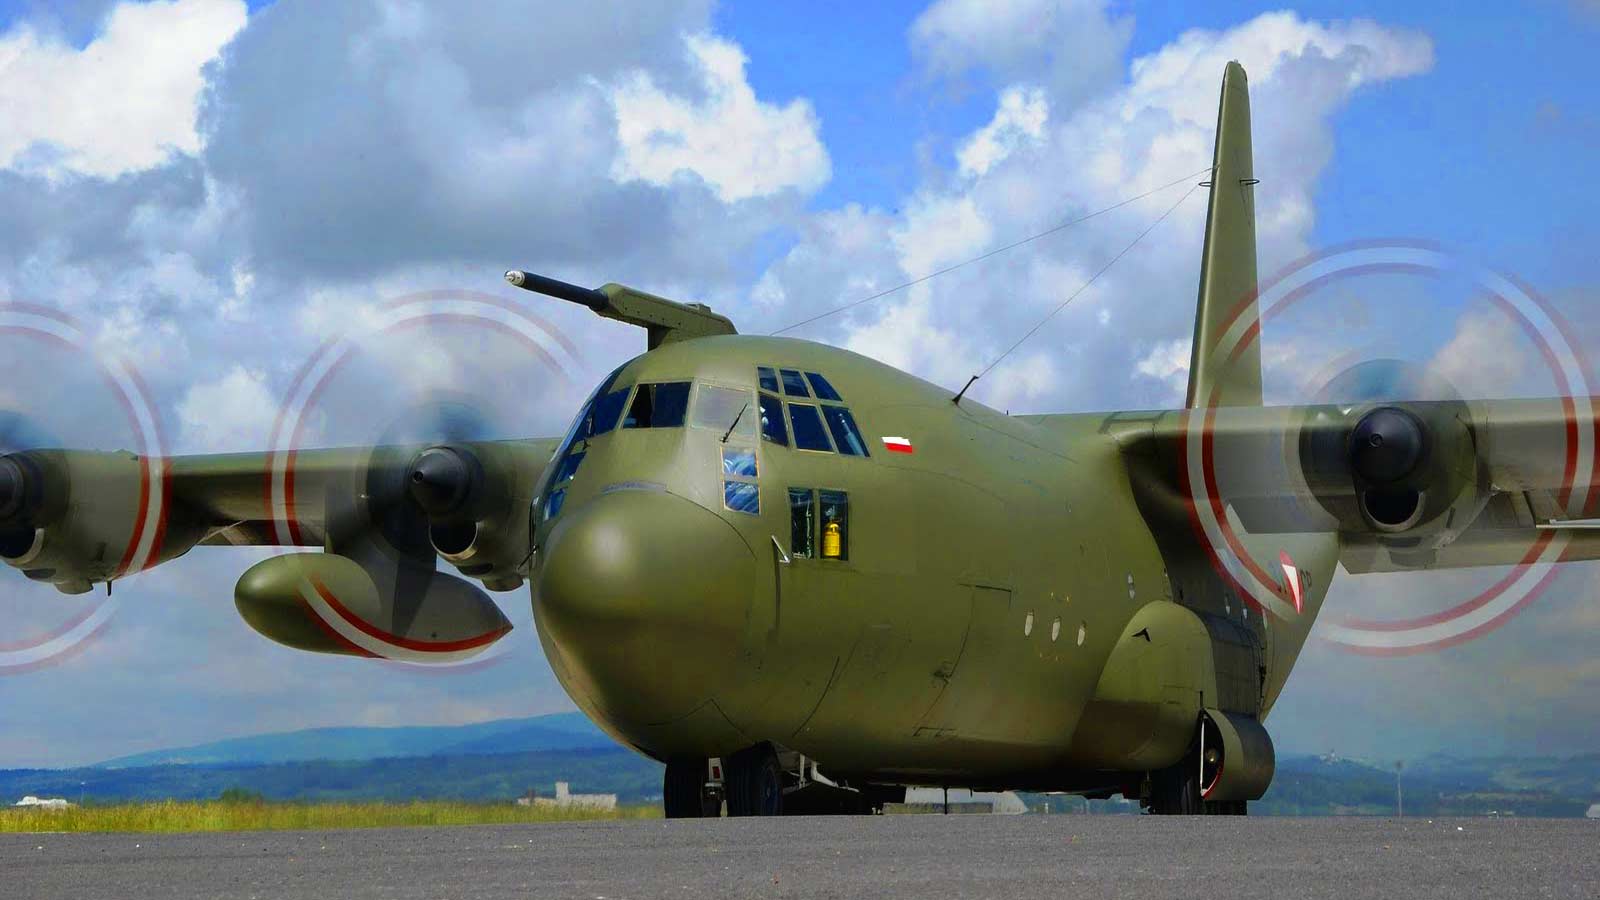 C-130 Hercules cargo plane, similar to the one on which Kristvin had been working.